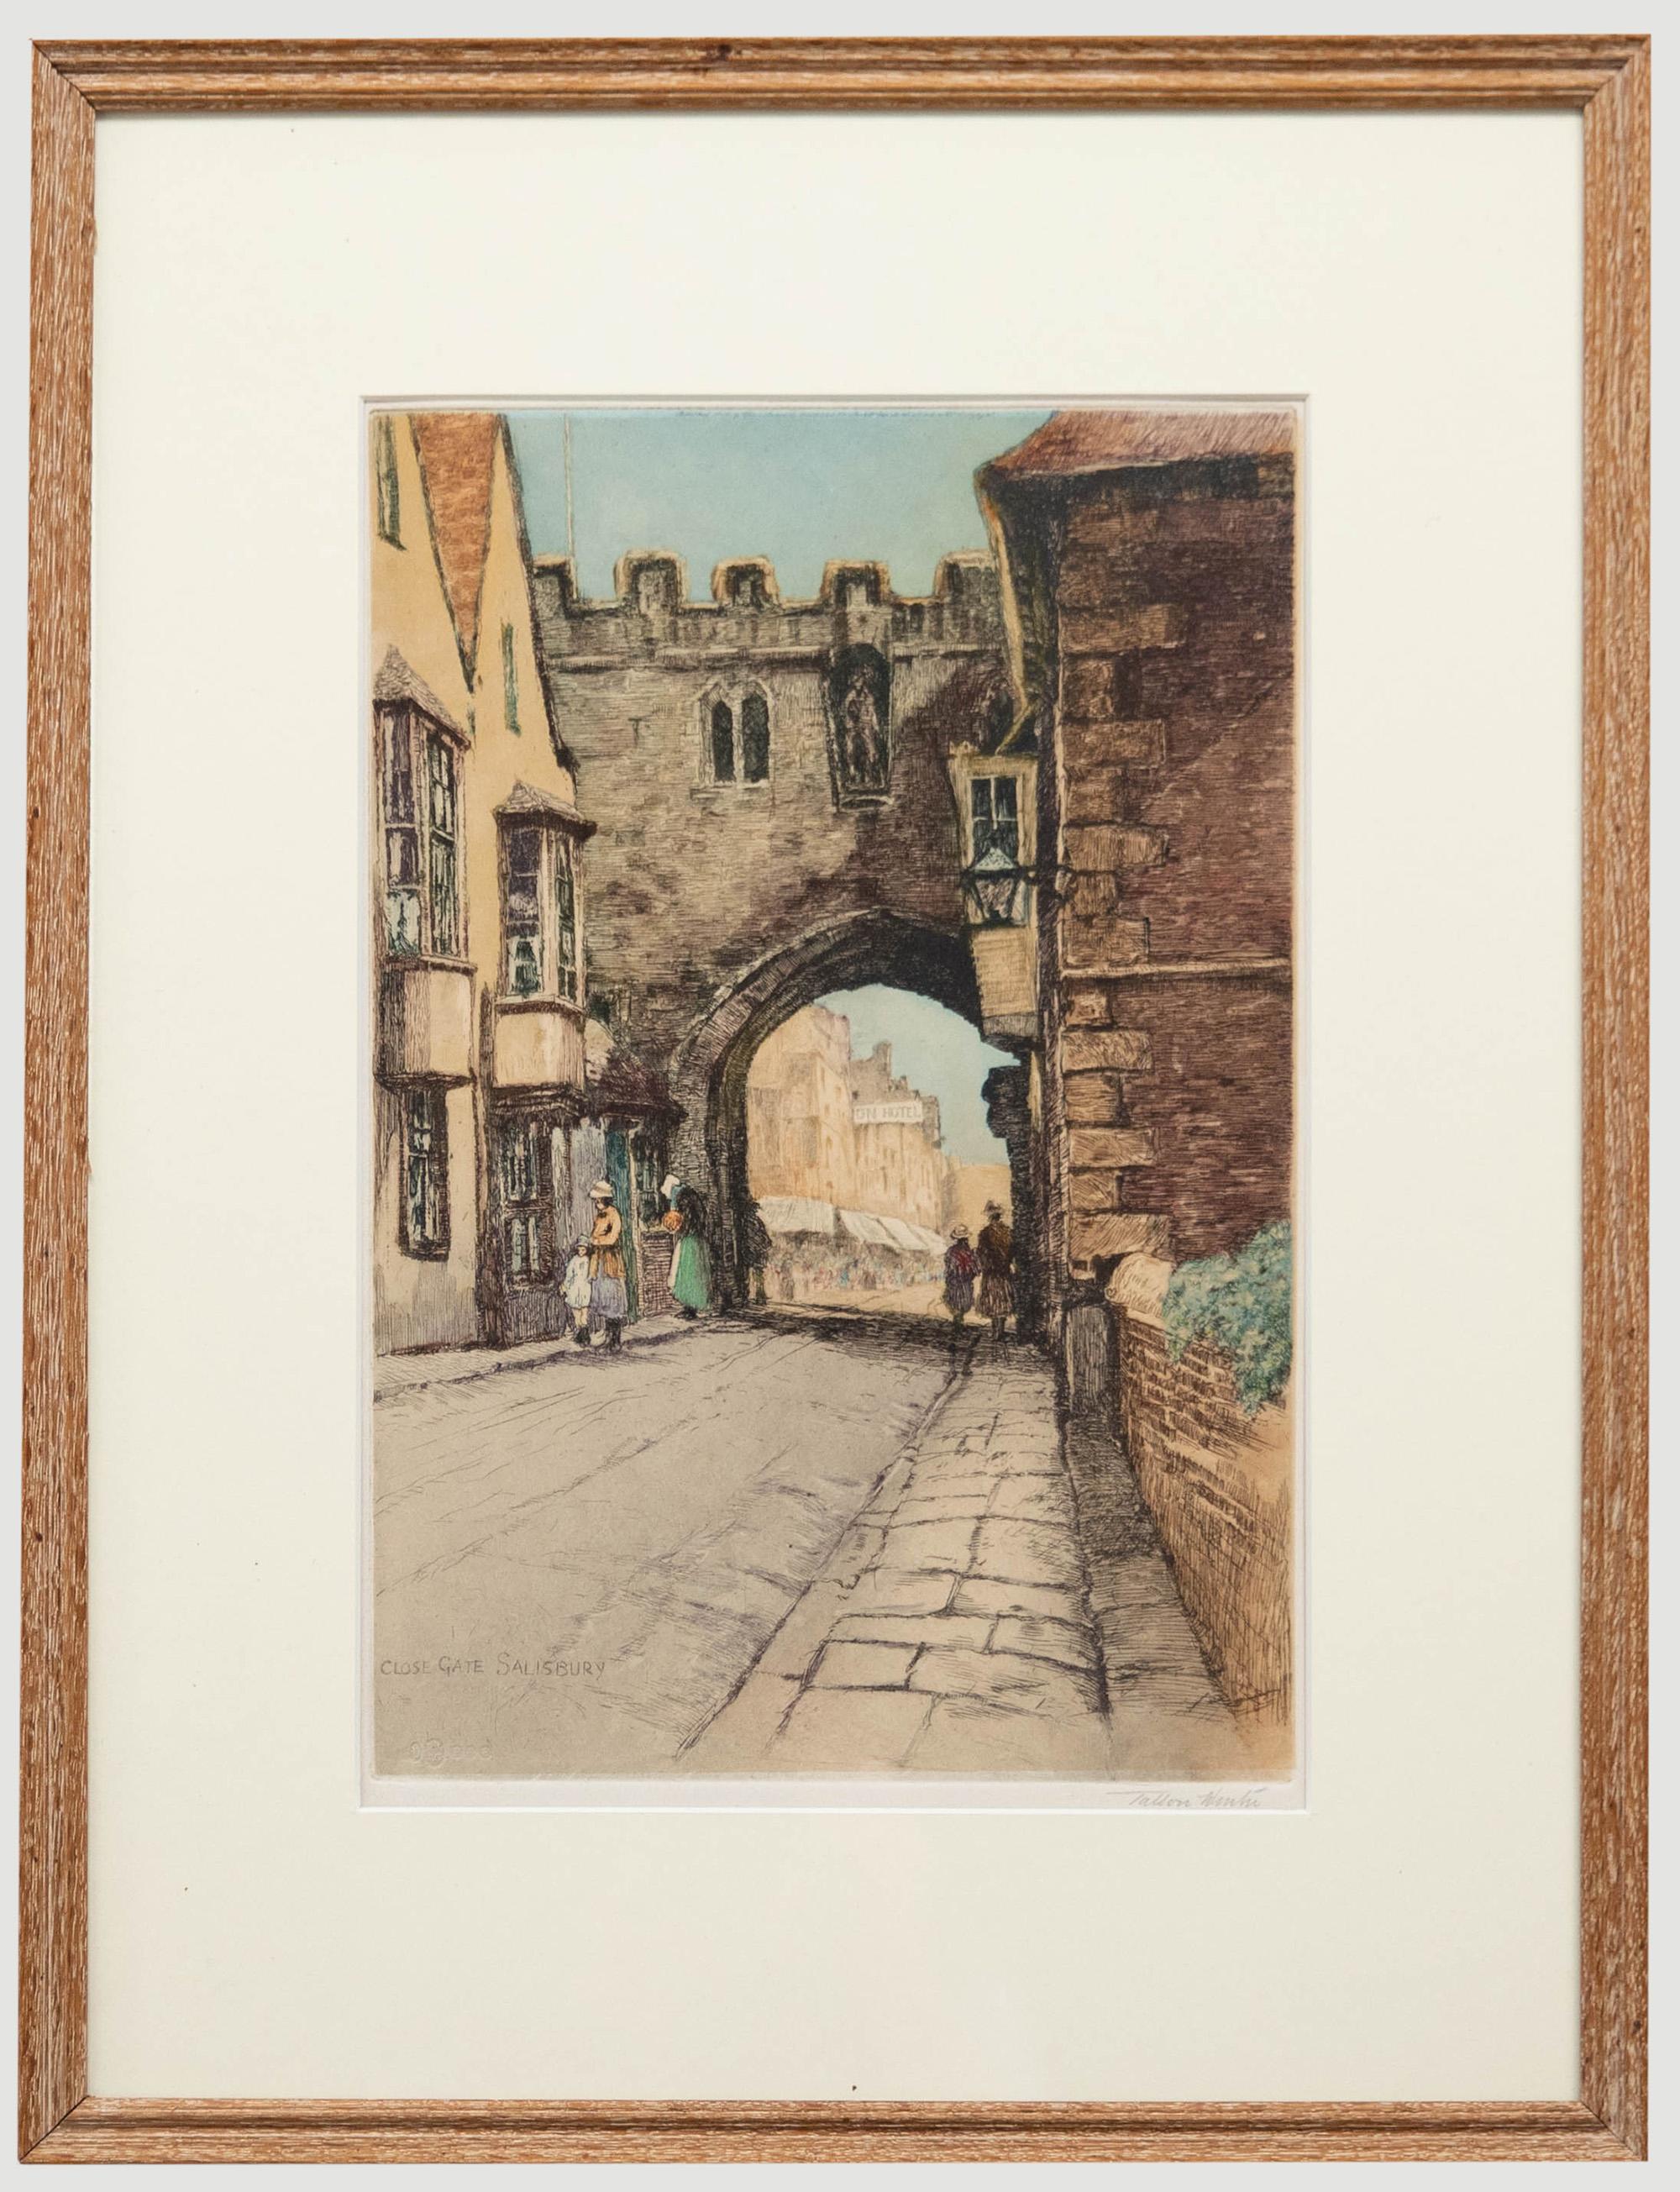 A fine etching in colours by the well listed artist William Tatton Winter (1855-1928). Signed in pencil below plate lines. Inscribed in plate to the lower left. Smartly mounted in a lime-washed oak frame. On paper.